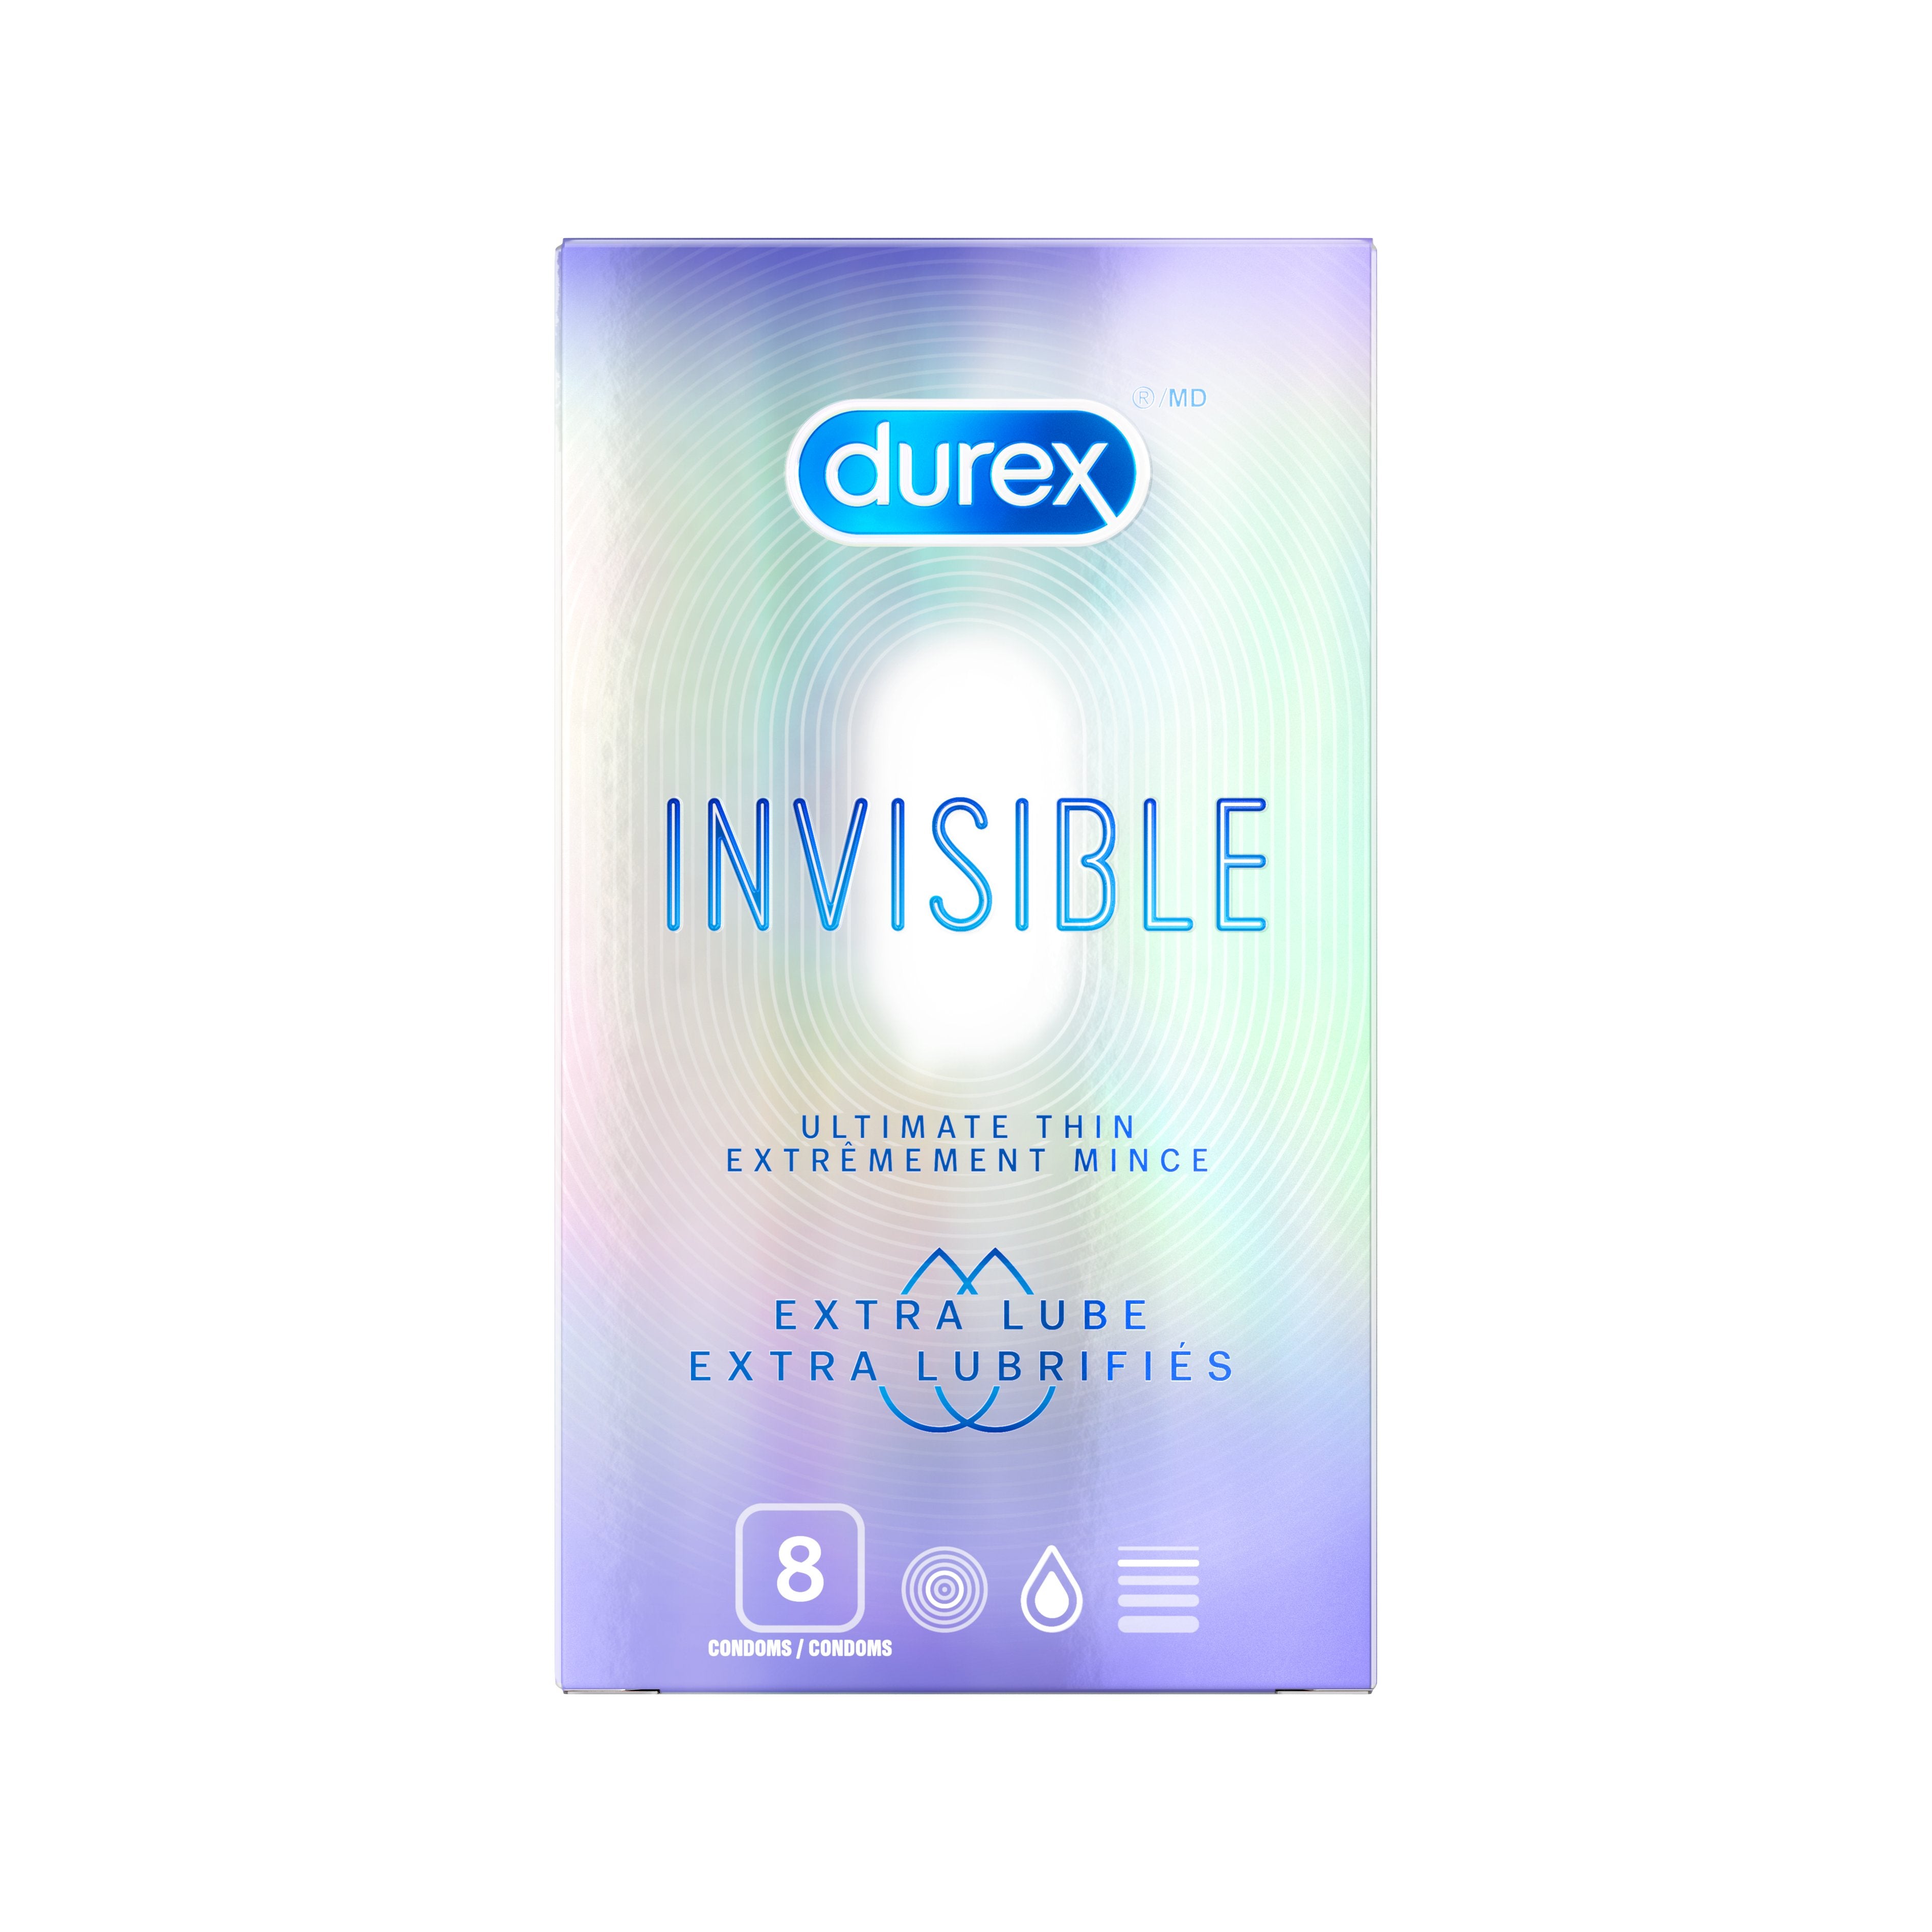 Durex Invisible, Our Thinnest Condom, Extra Lubed For Smooth Sex